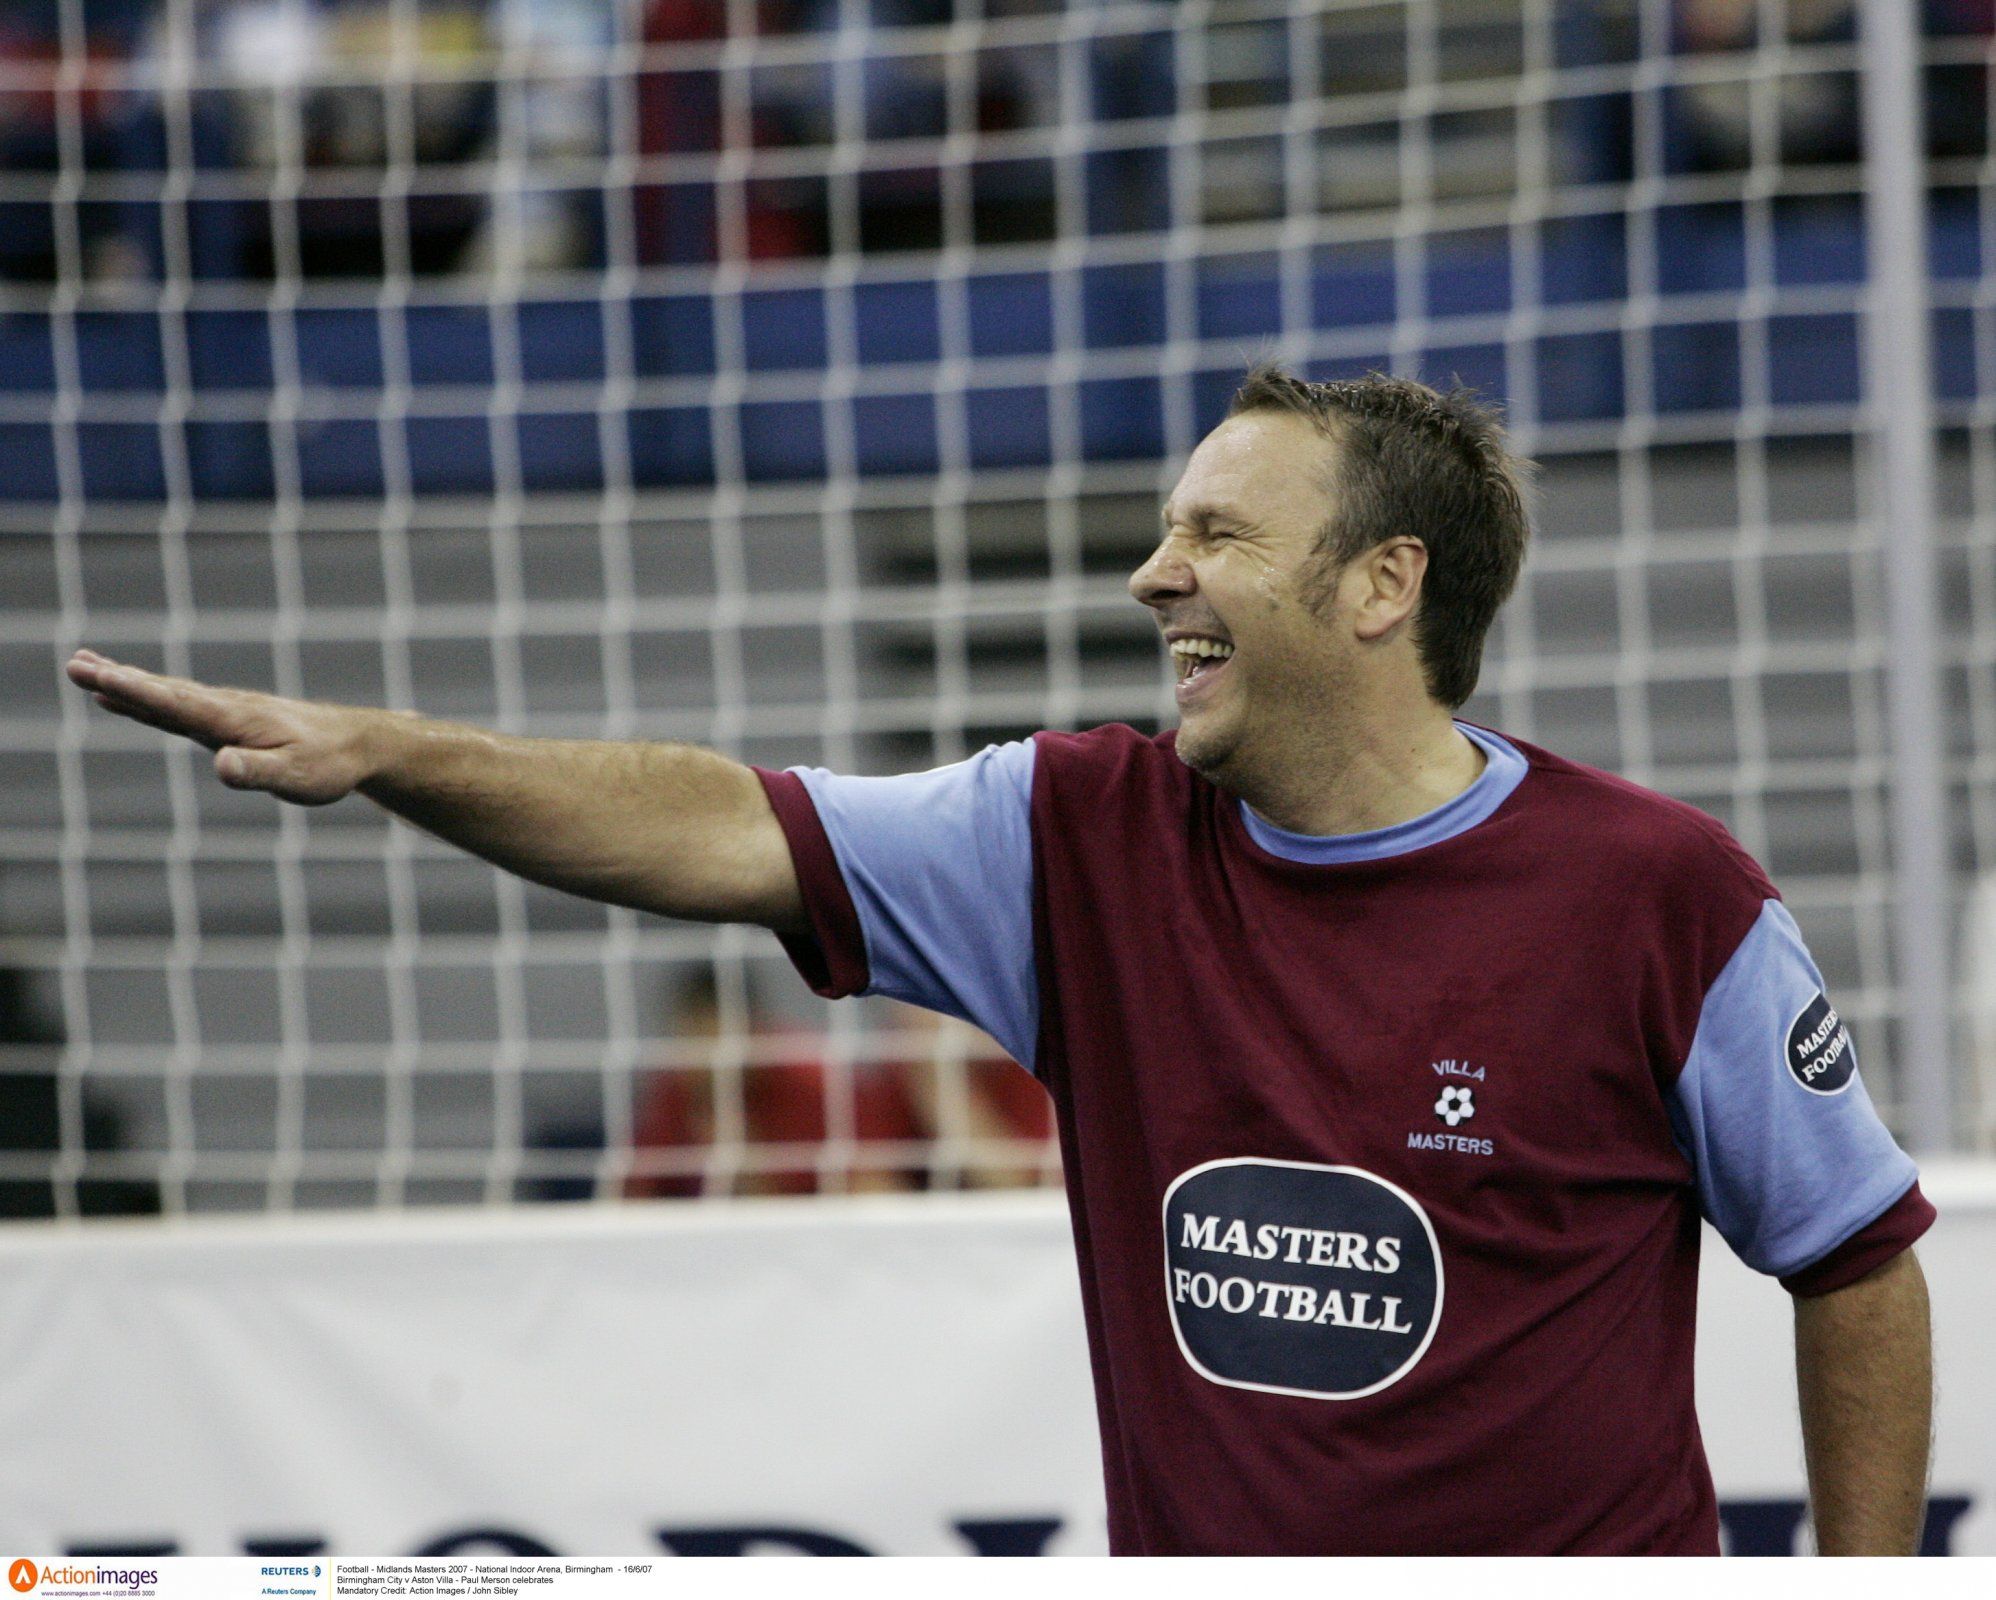 Paul Merson in action for Aston Villa's Masters team